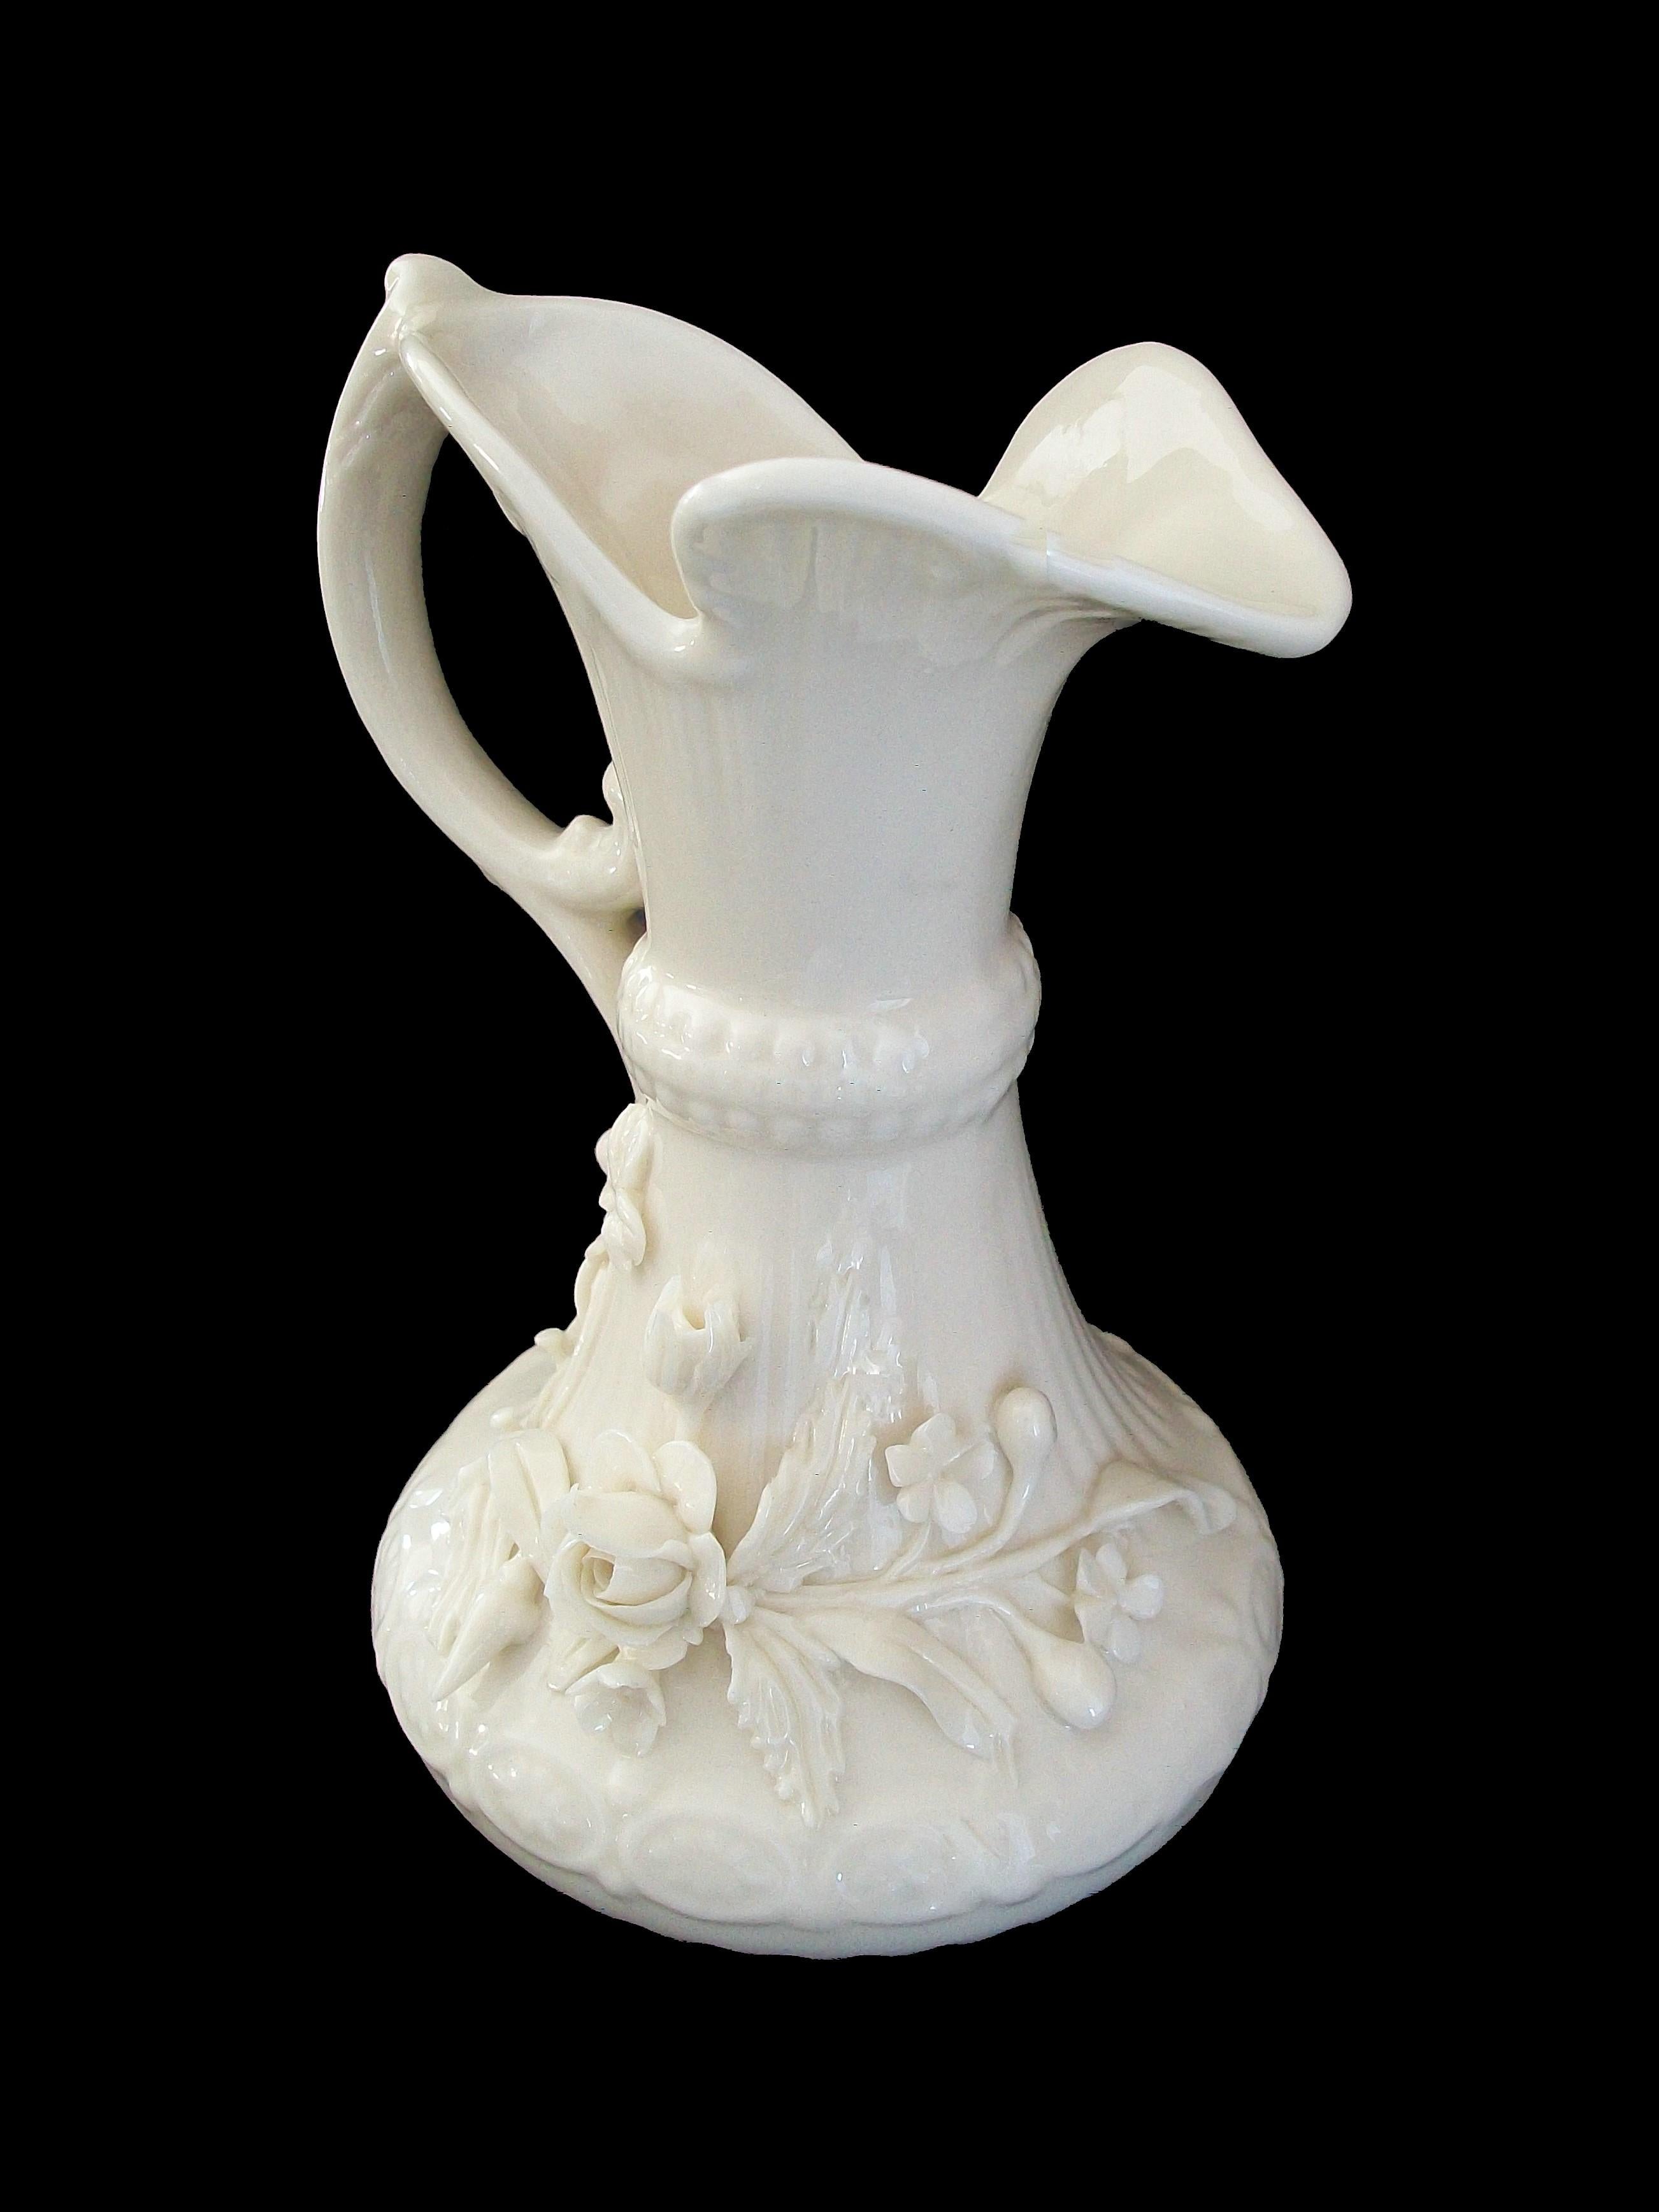 BELLEEK, Ceramic Ewer with Applied Floral Decoration, Ireland, Circa 1965-80 For Sale 2